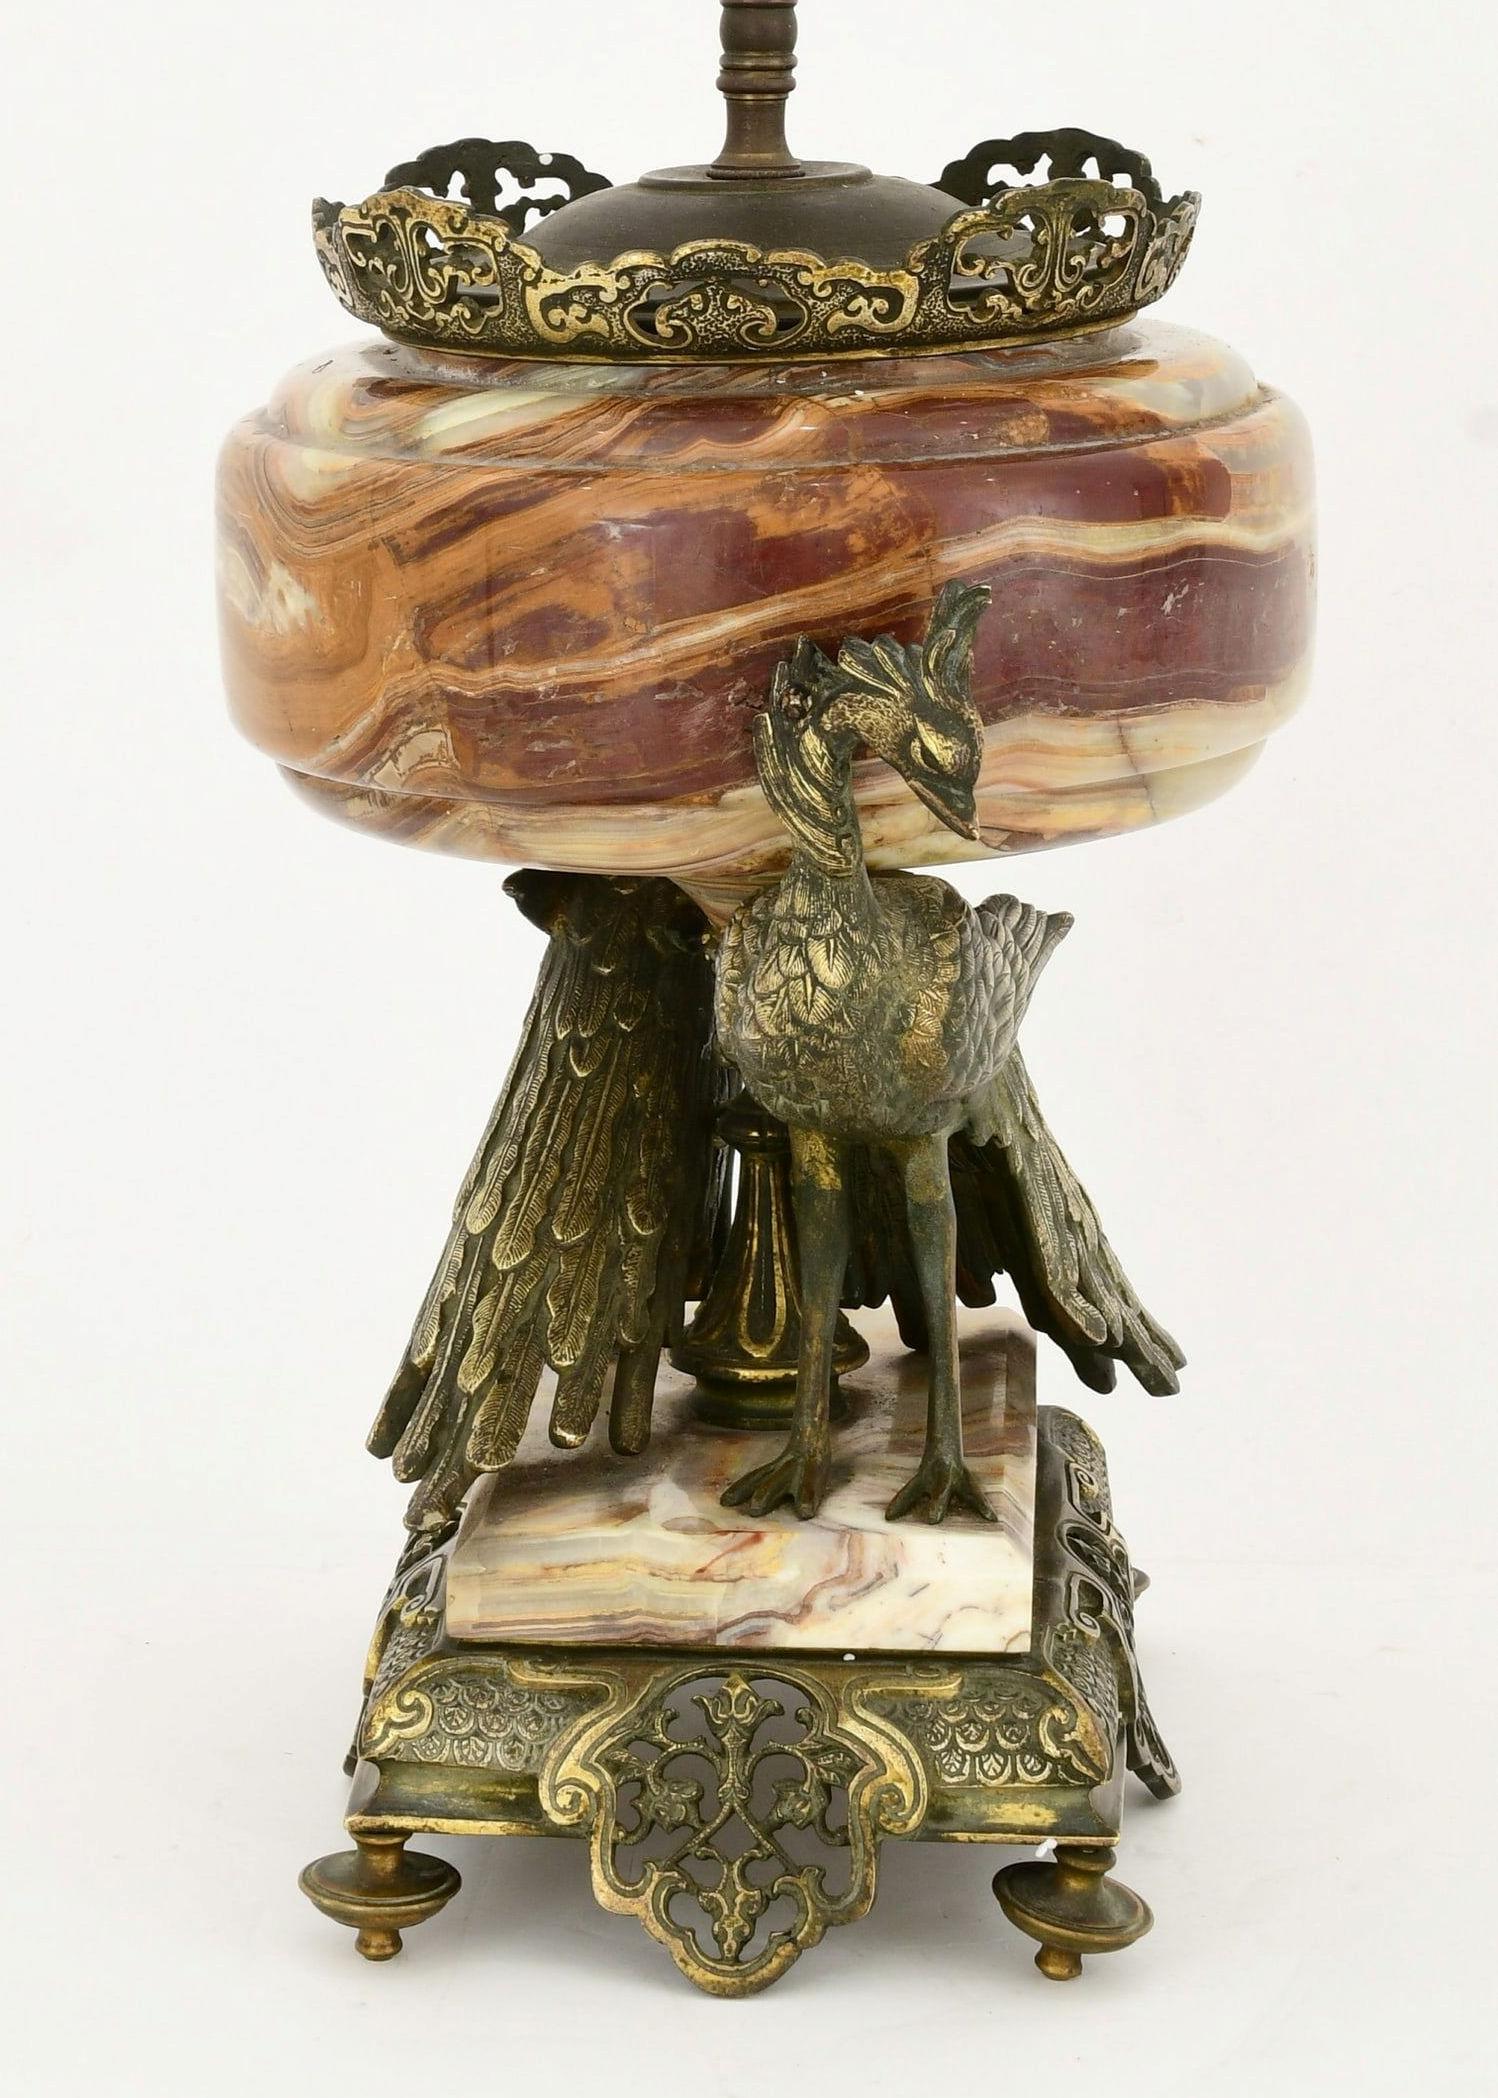 19th Century French Japonisme Bronze and Onyx Table Lamp with Figural Peacocks For Sale 3